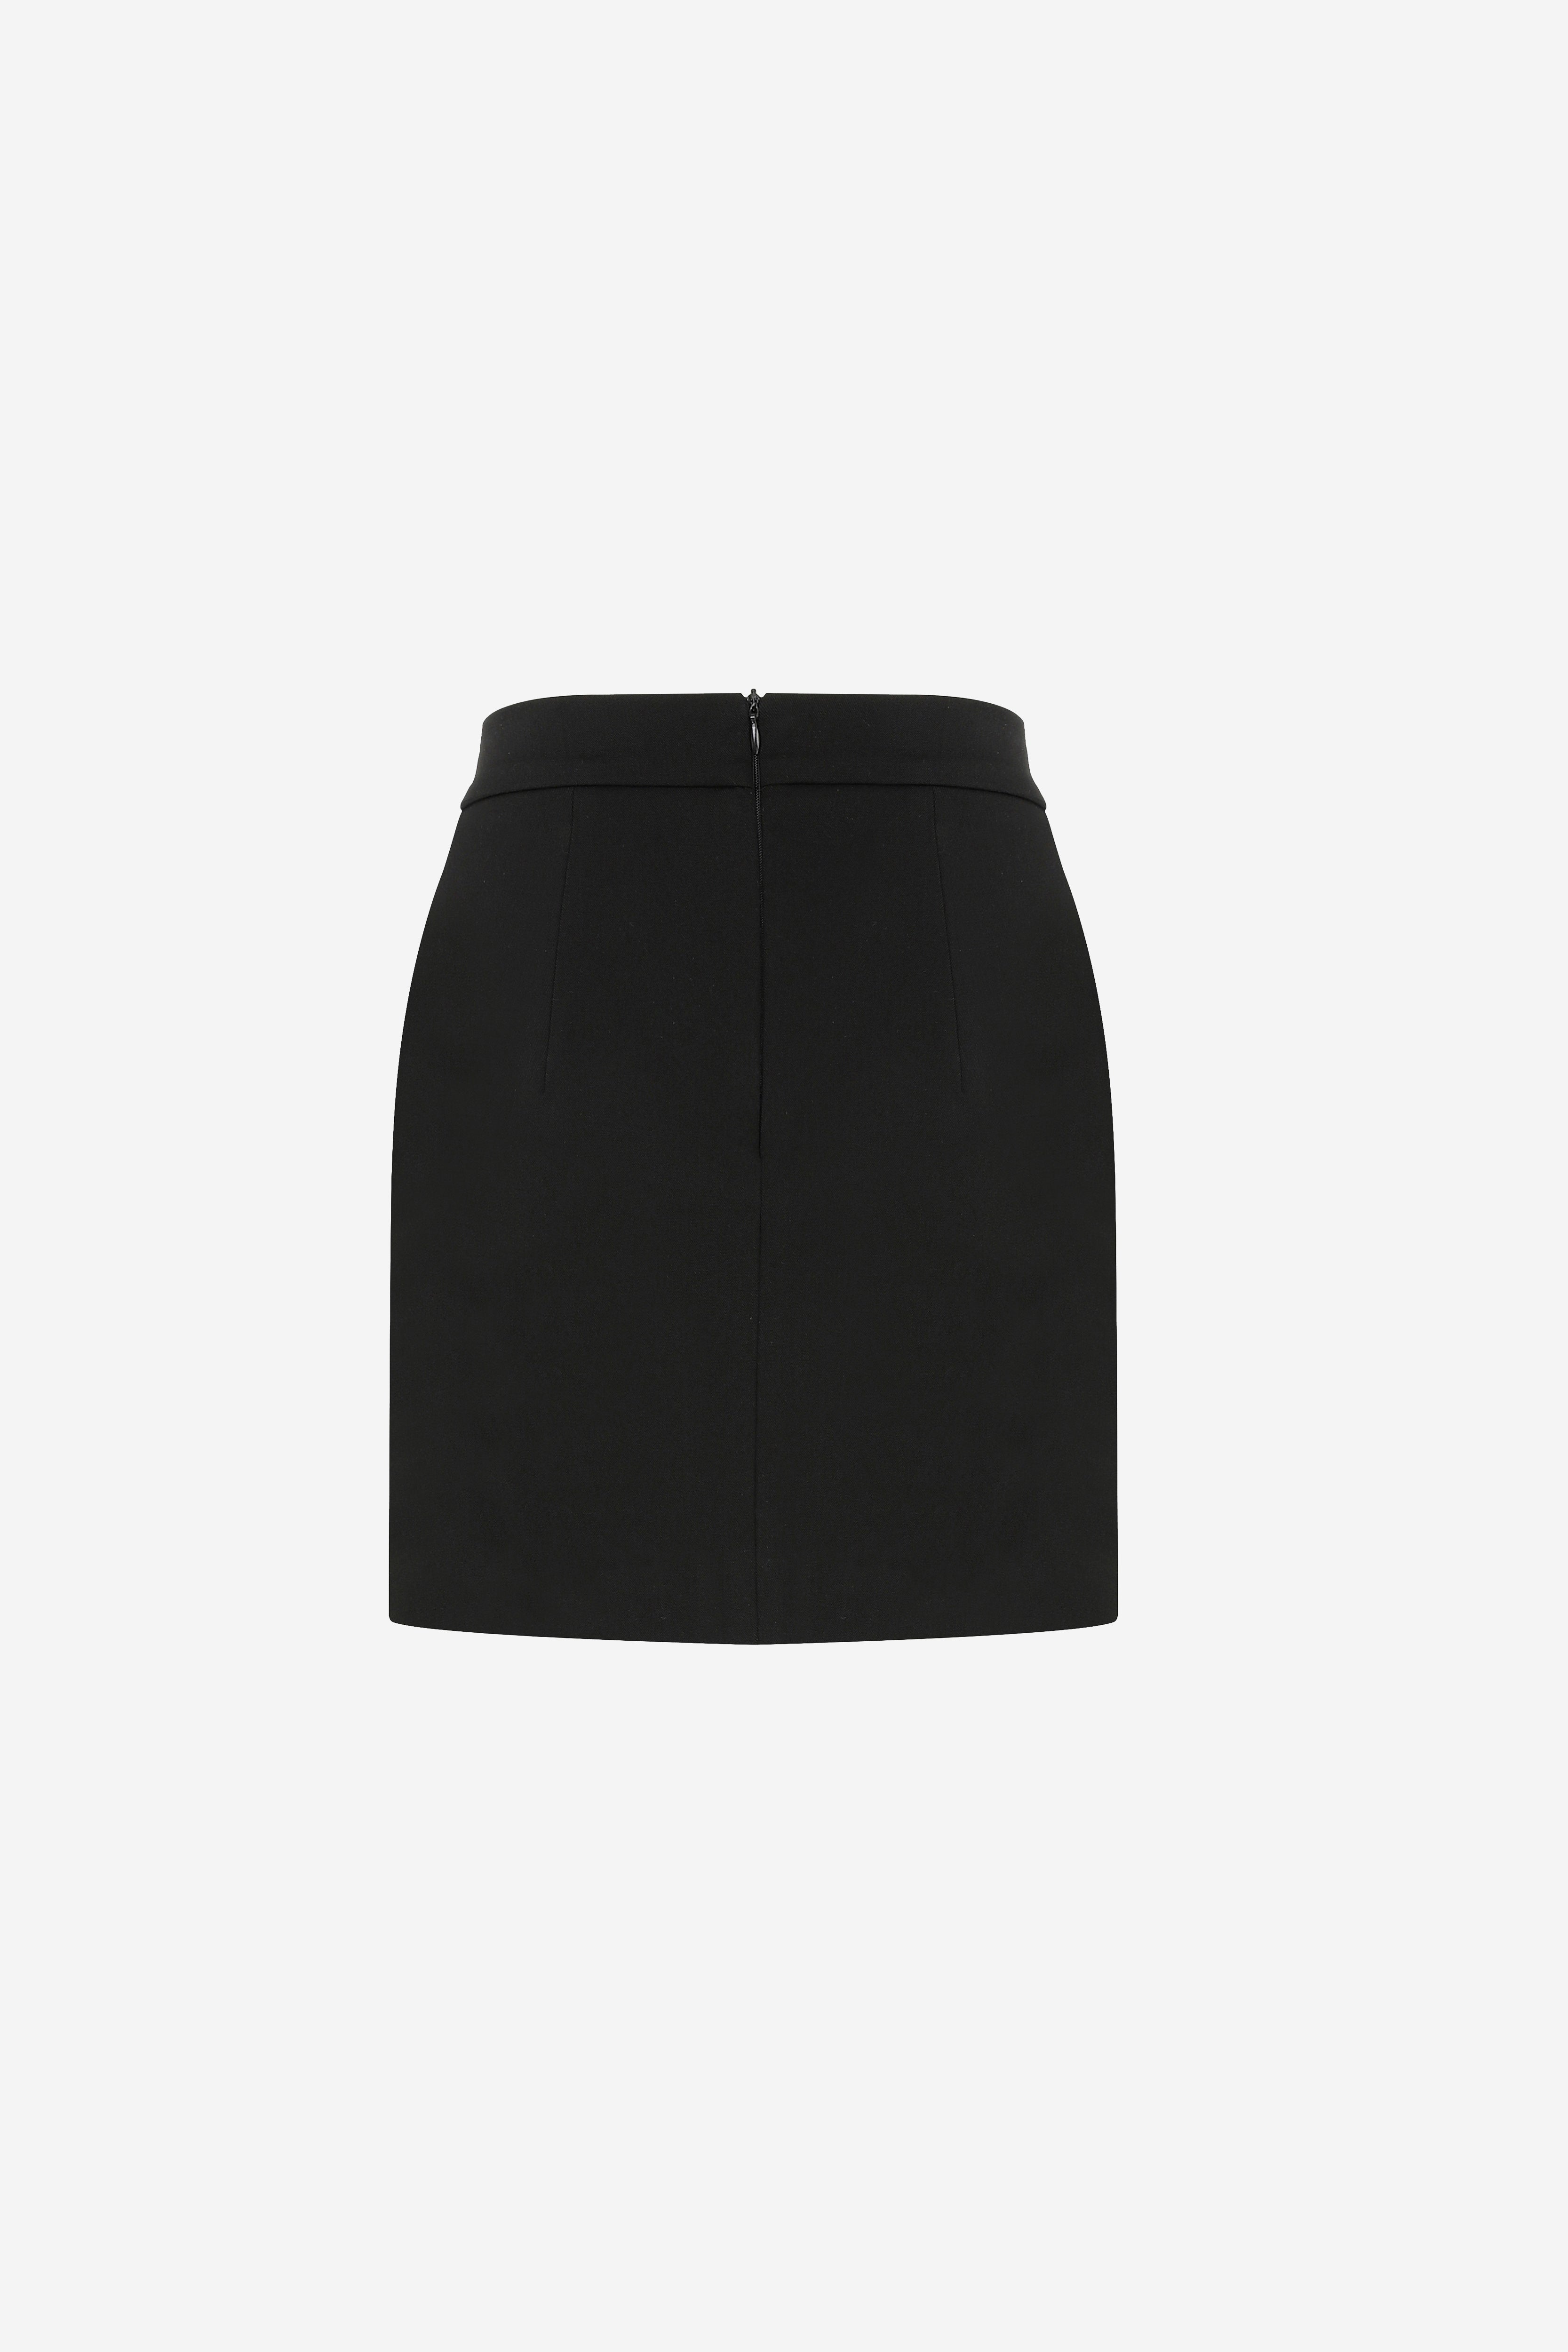 JANINE - MINI SKIRT WITH FRONT SLIT